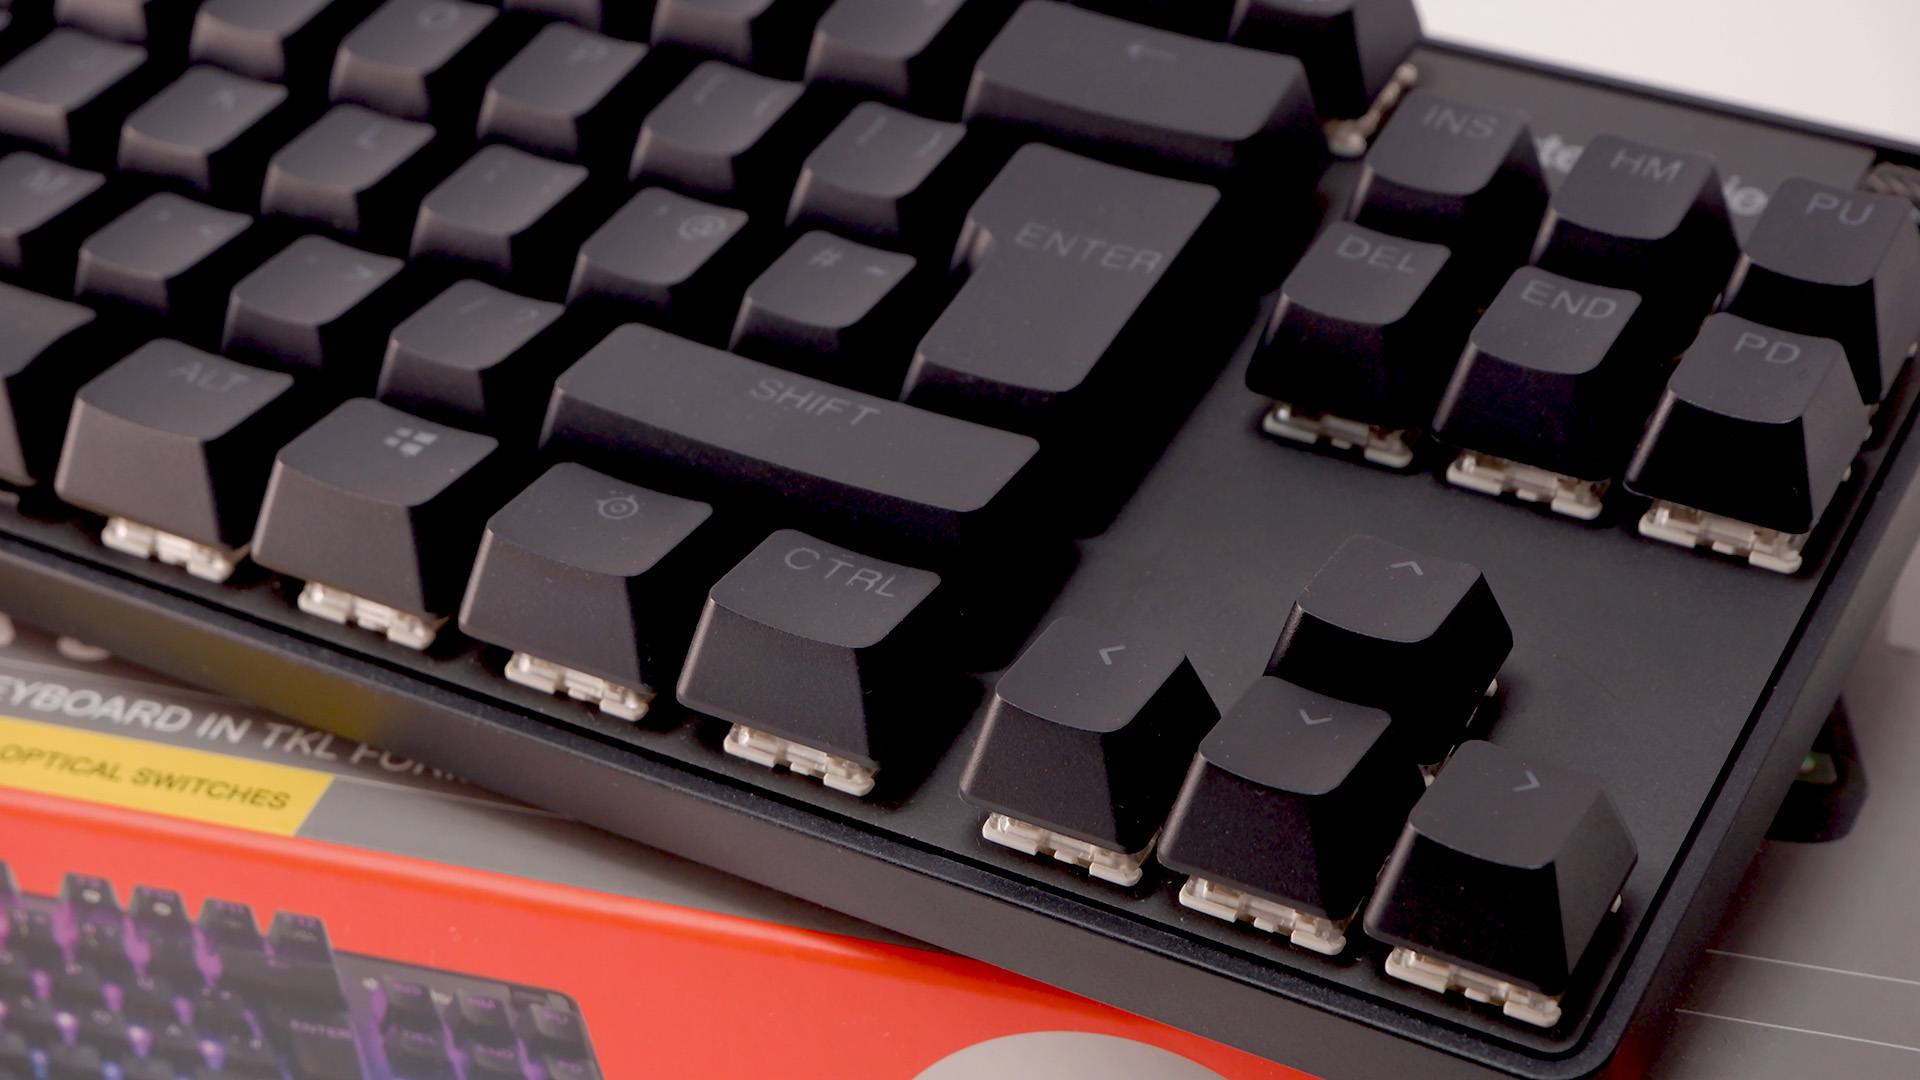  You don't need an expensive gaming keyboard 